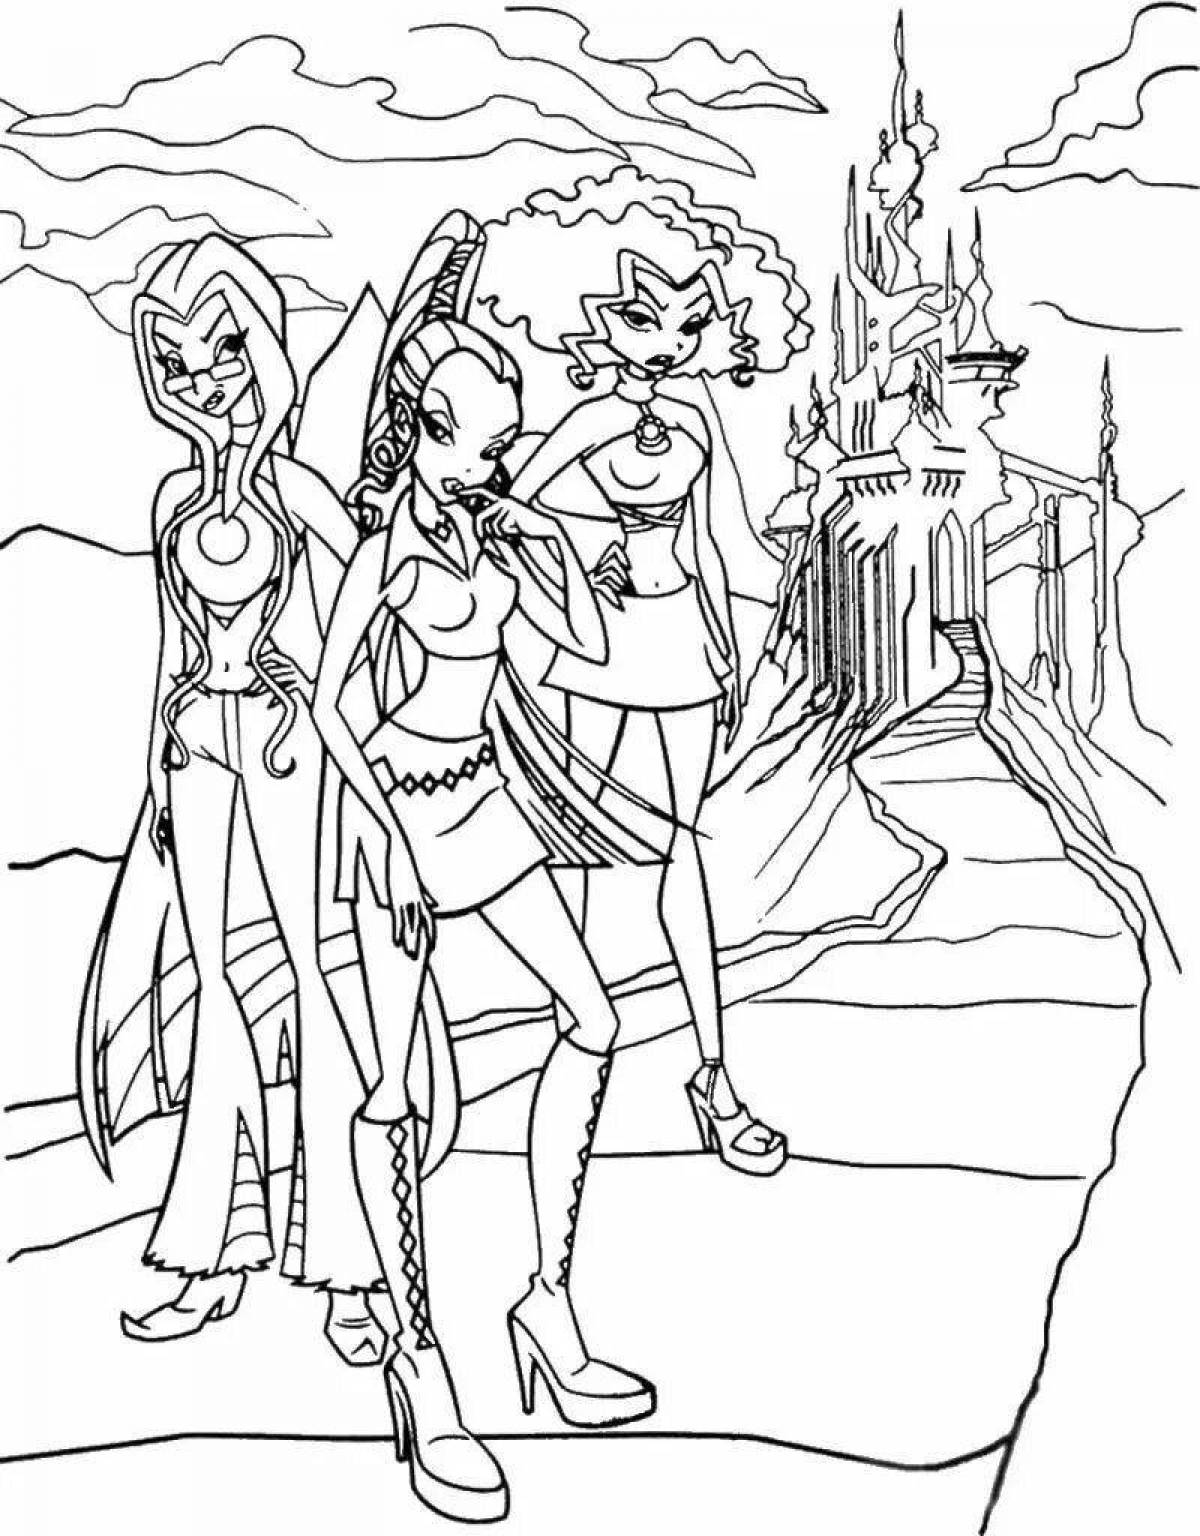 Grand cave club coloring page